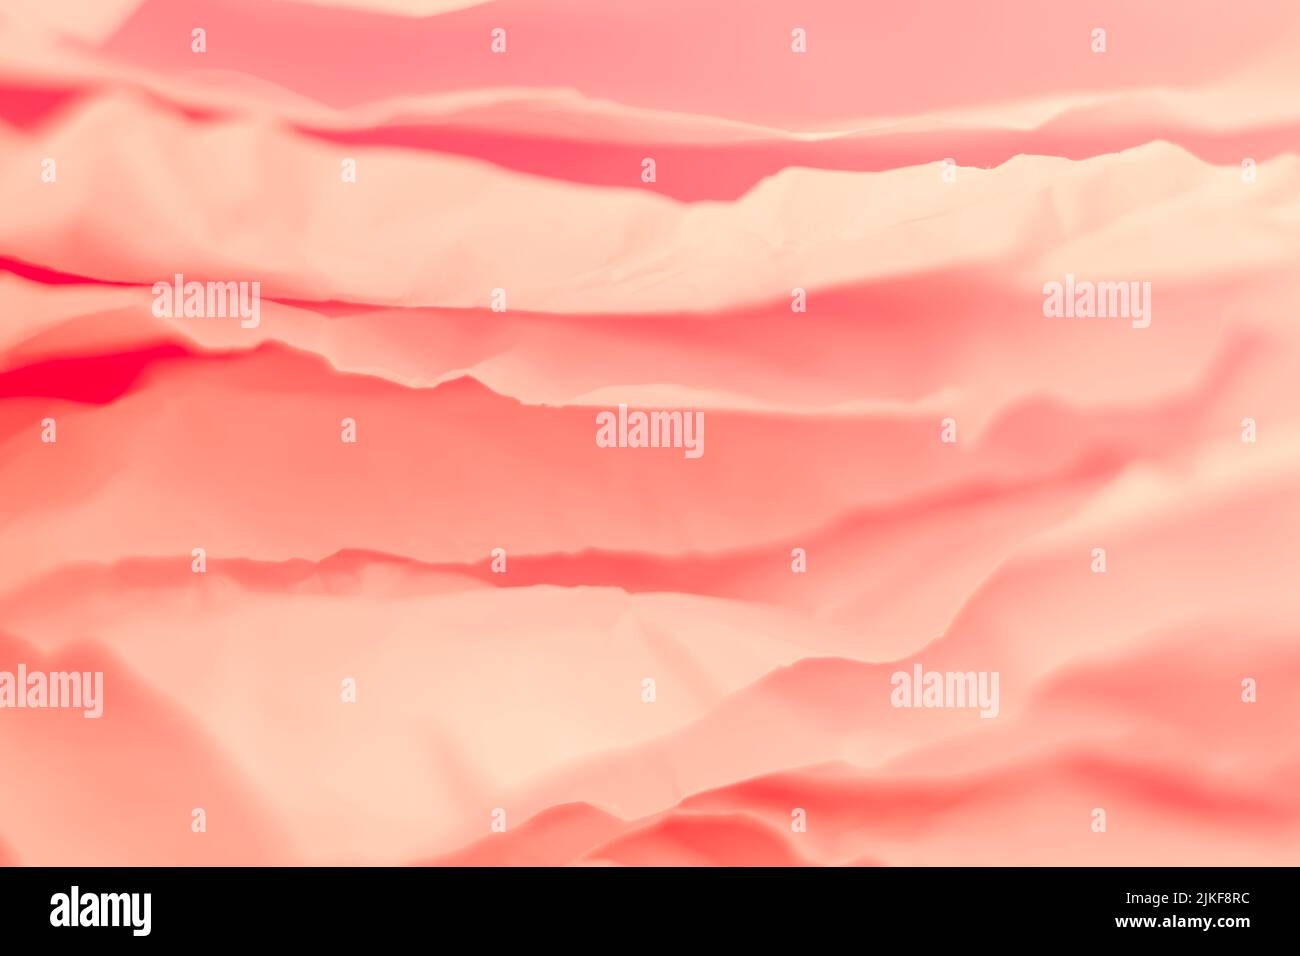 coral red paper layers background rose petals Stock Photo